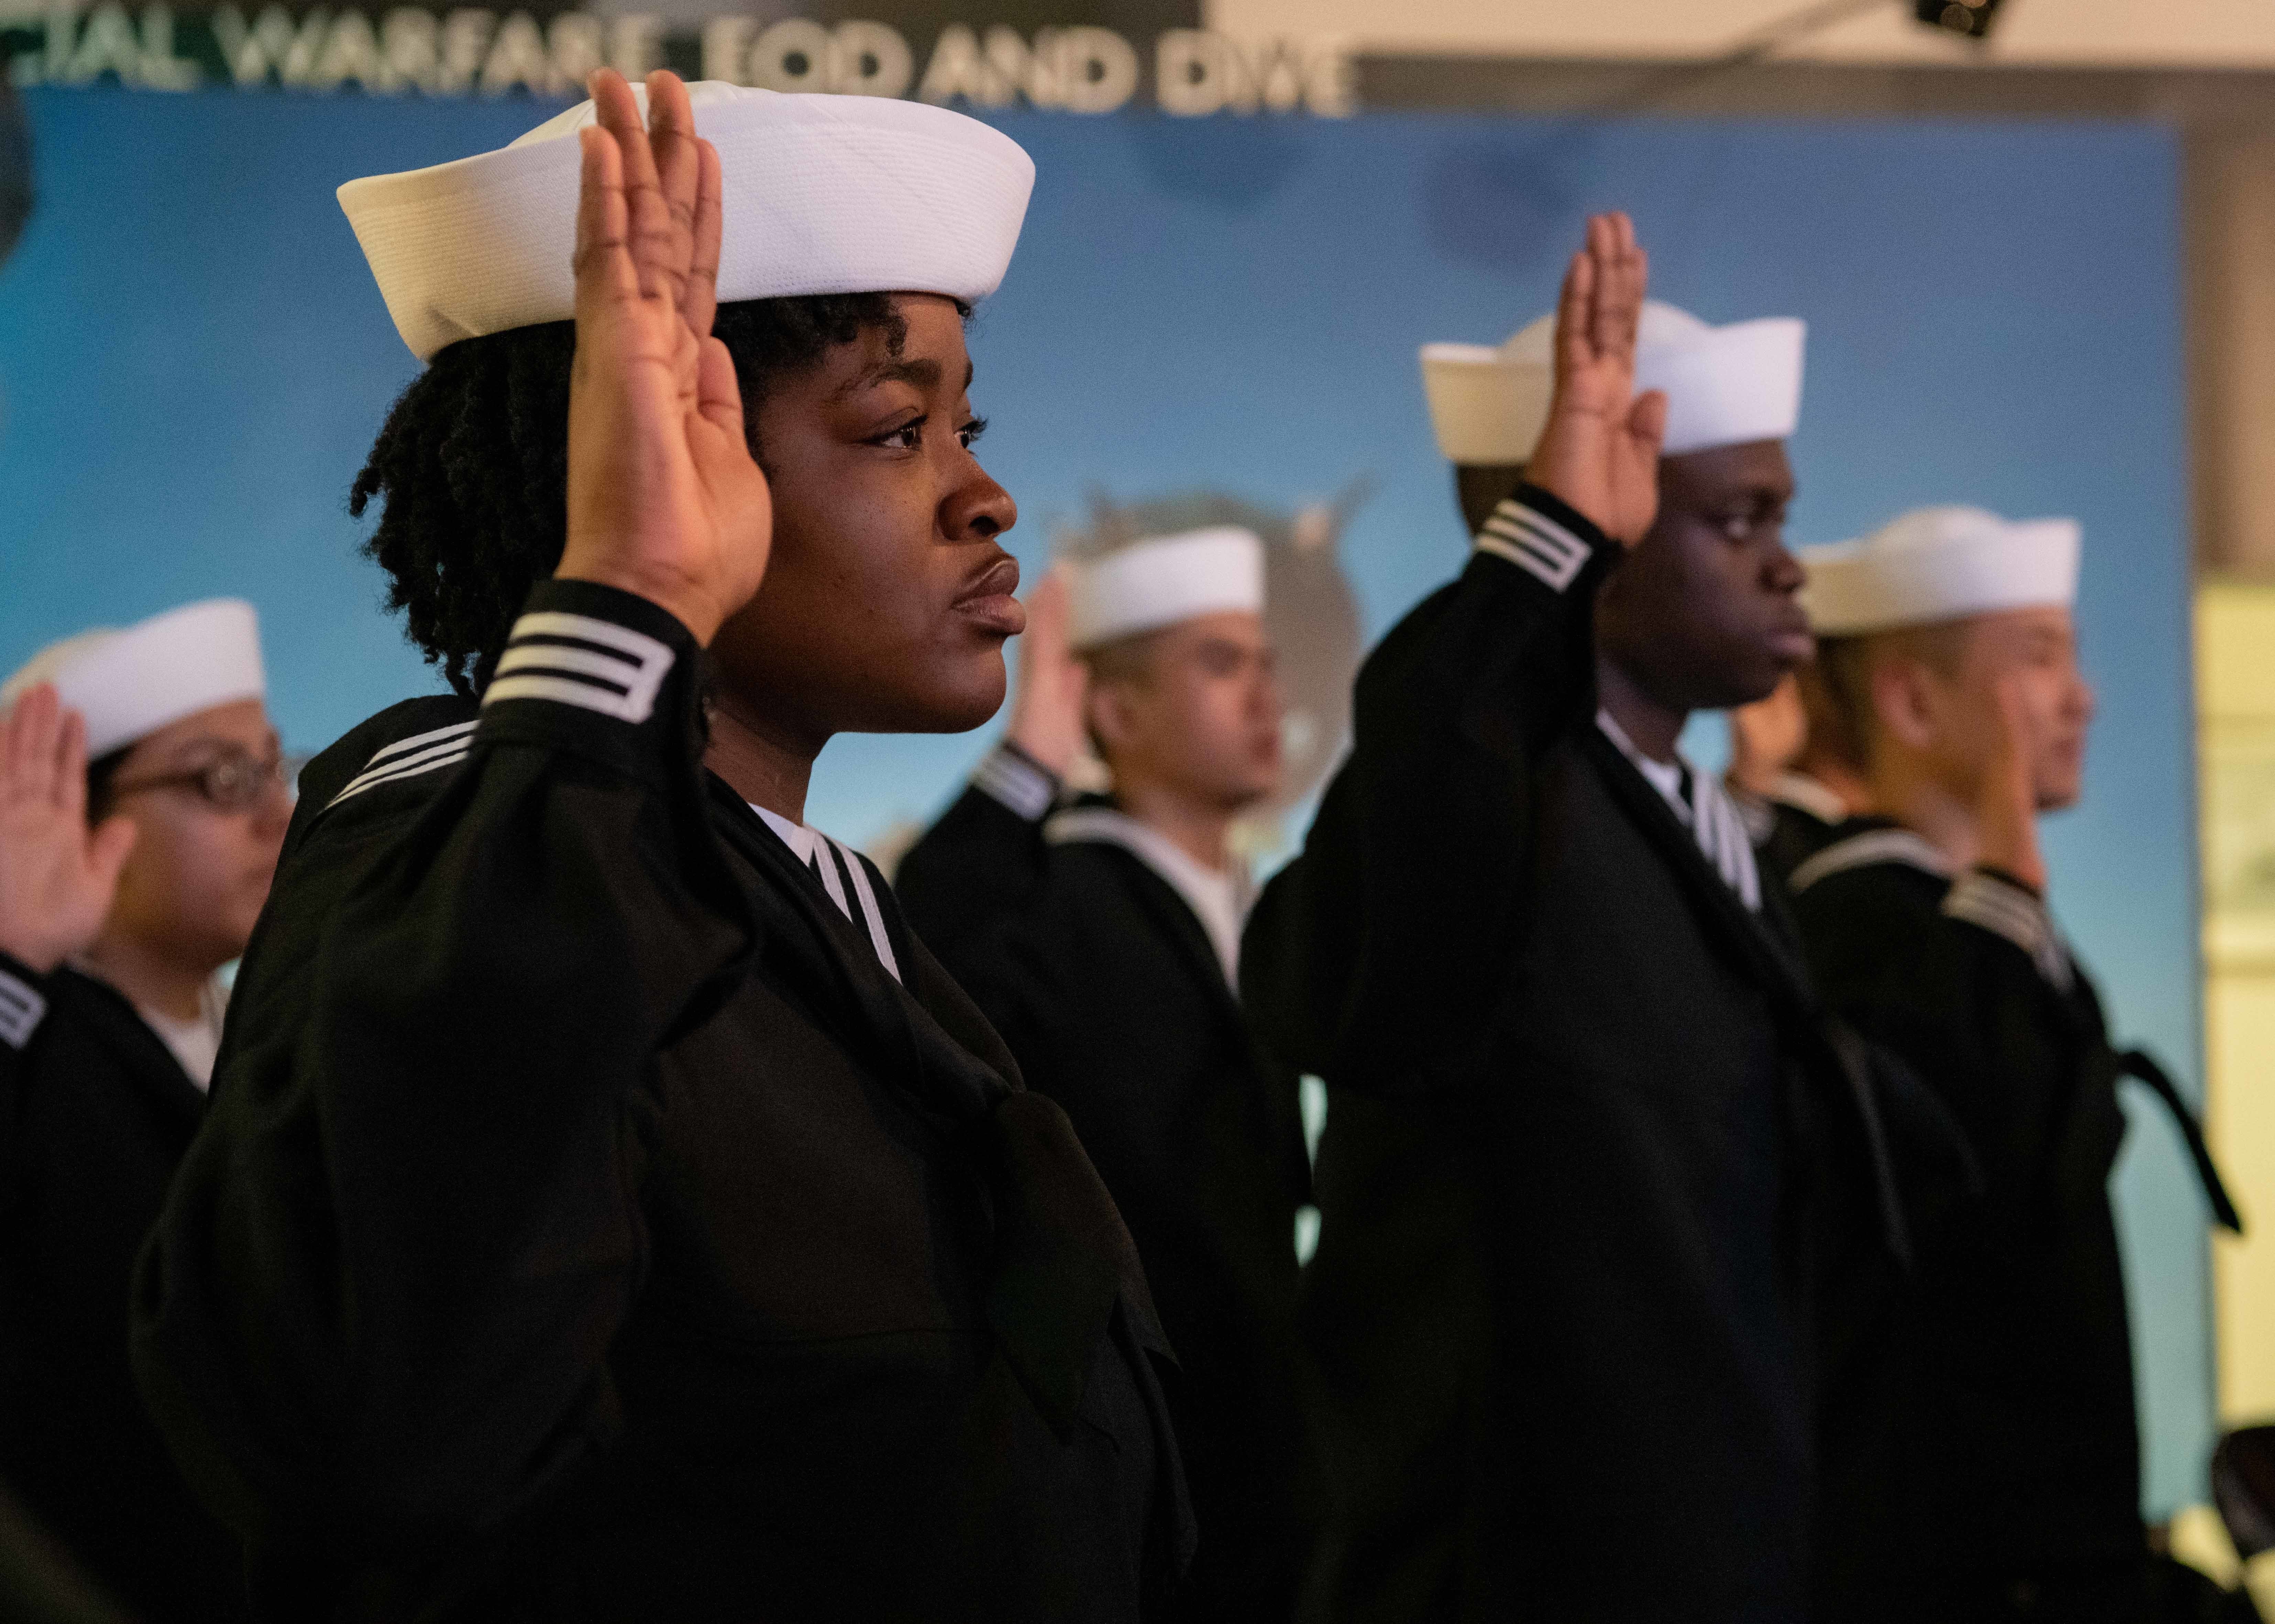 A local nurse's dream is to join the Navy, and she can pass the